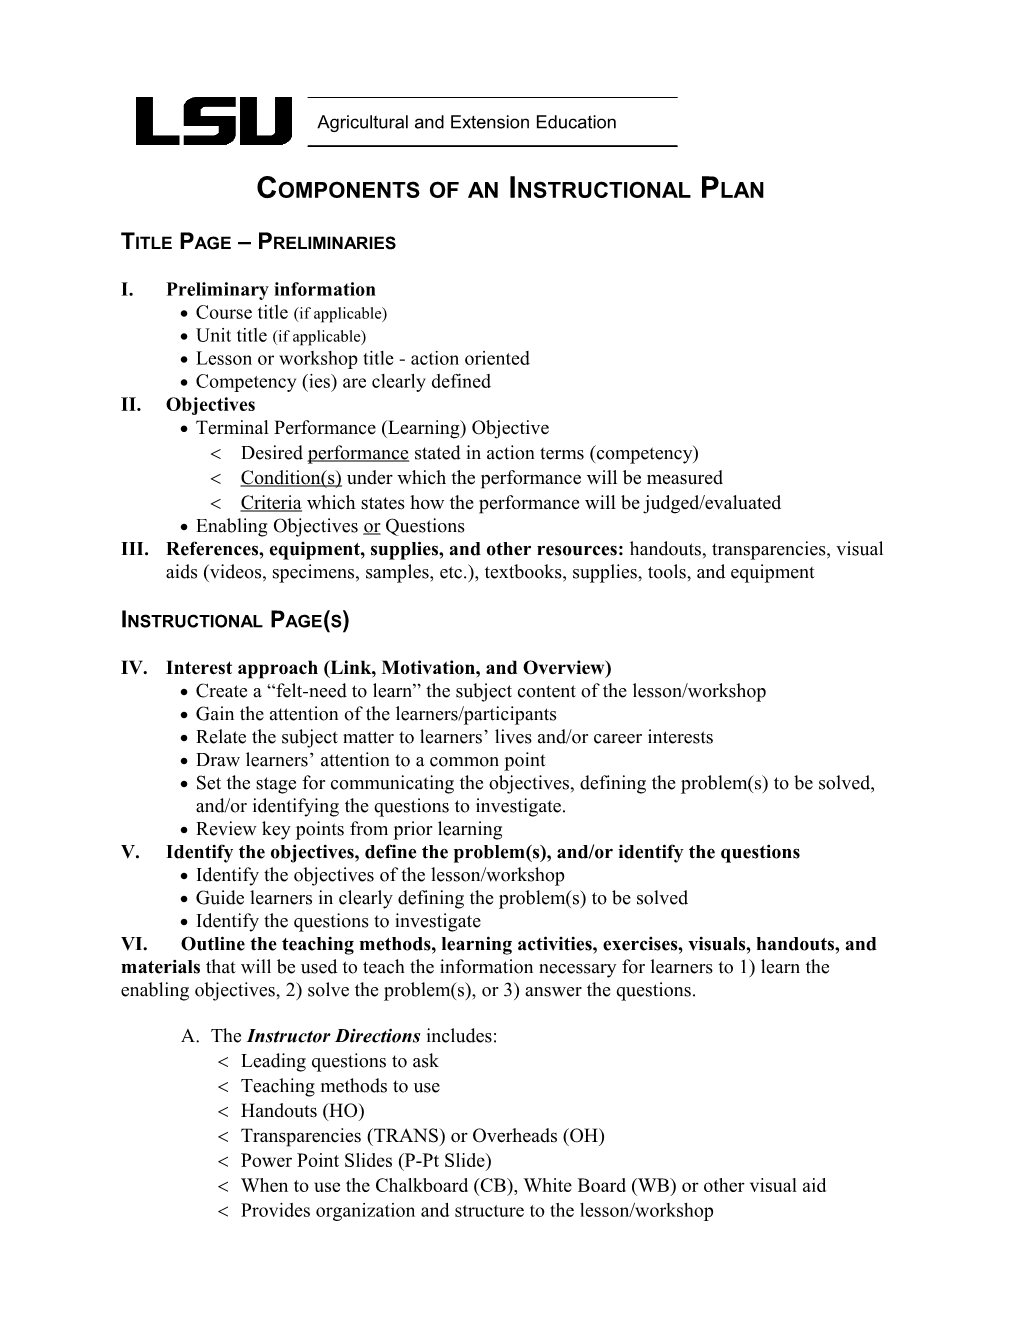 Components of an Instructional Plan